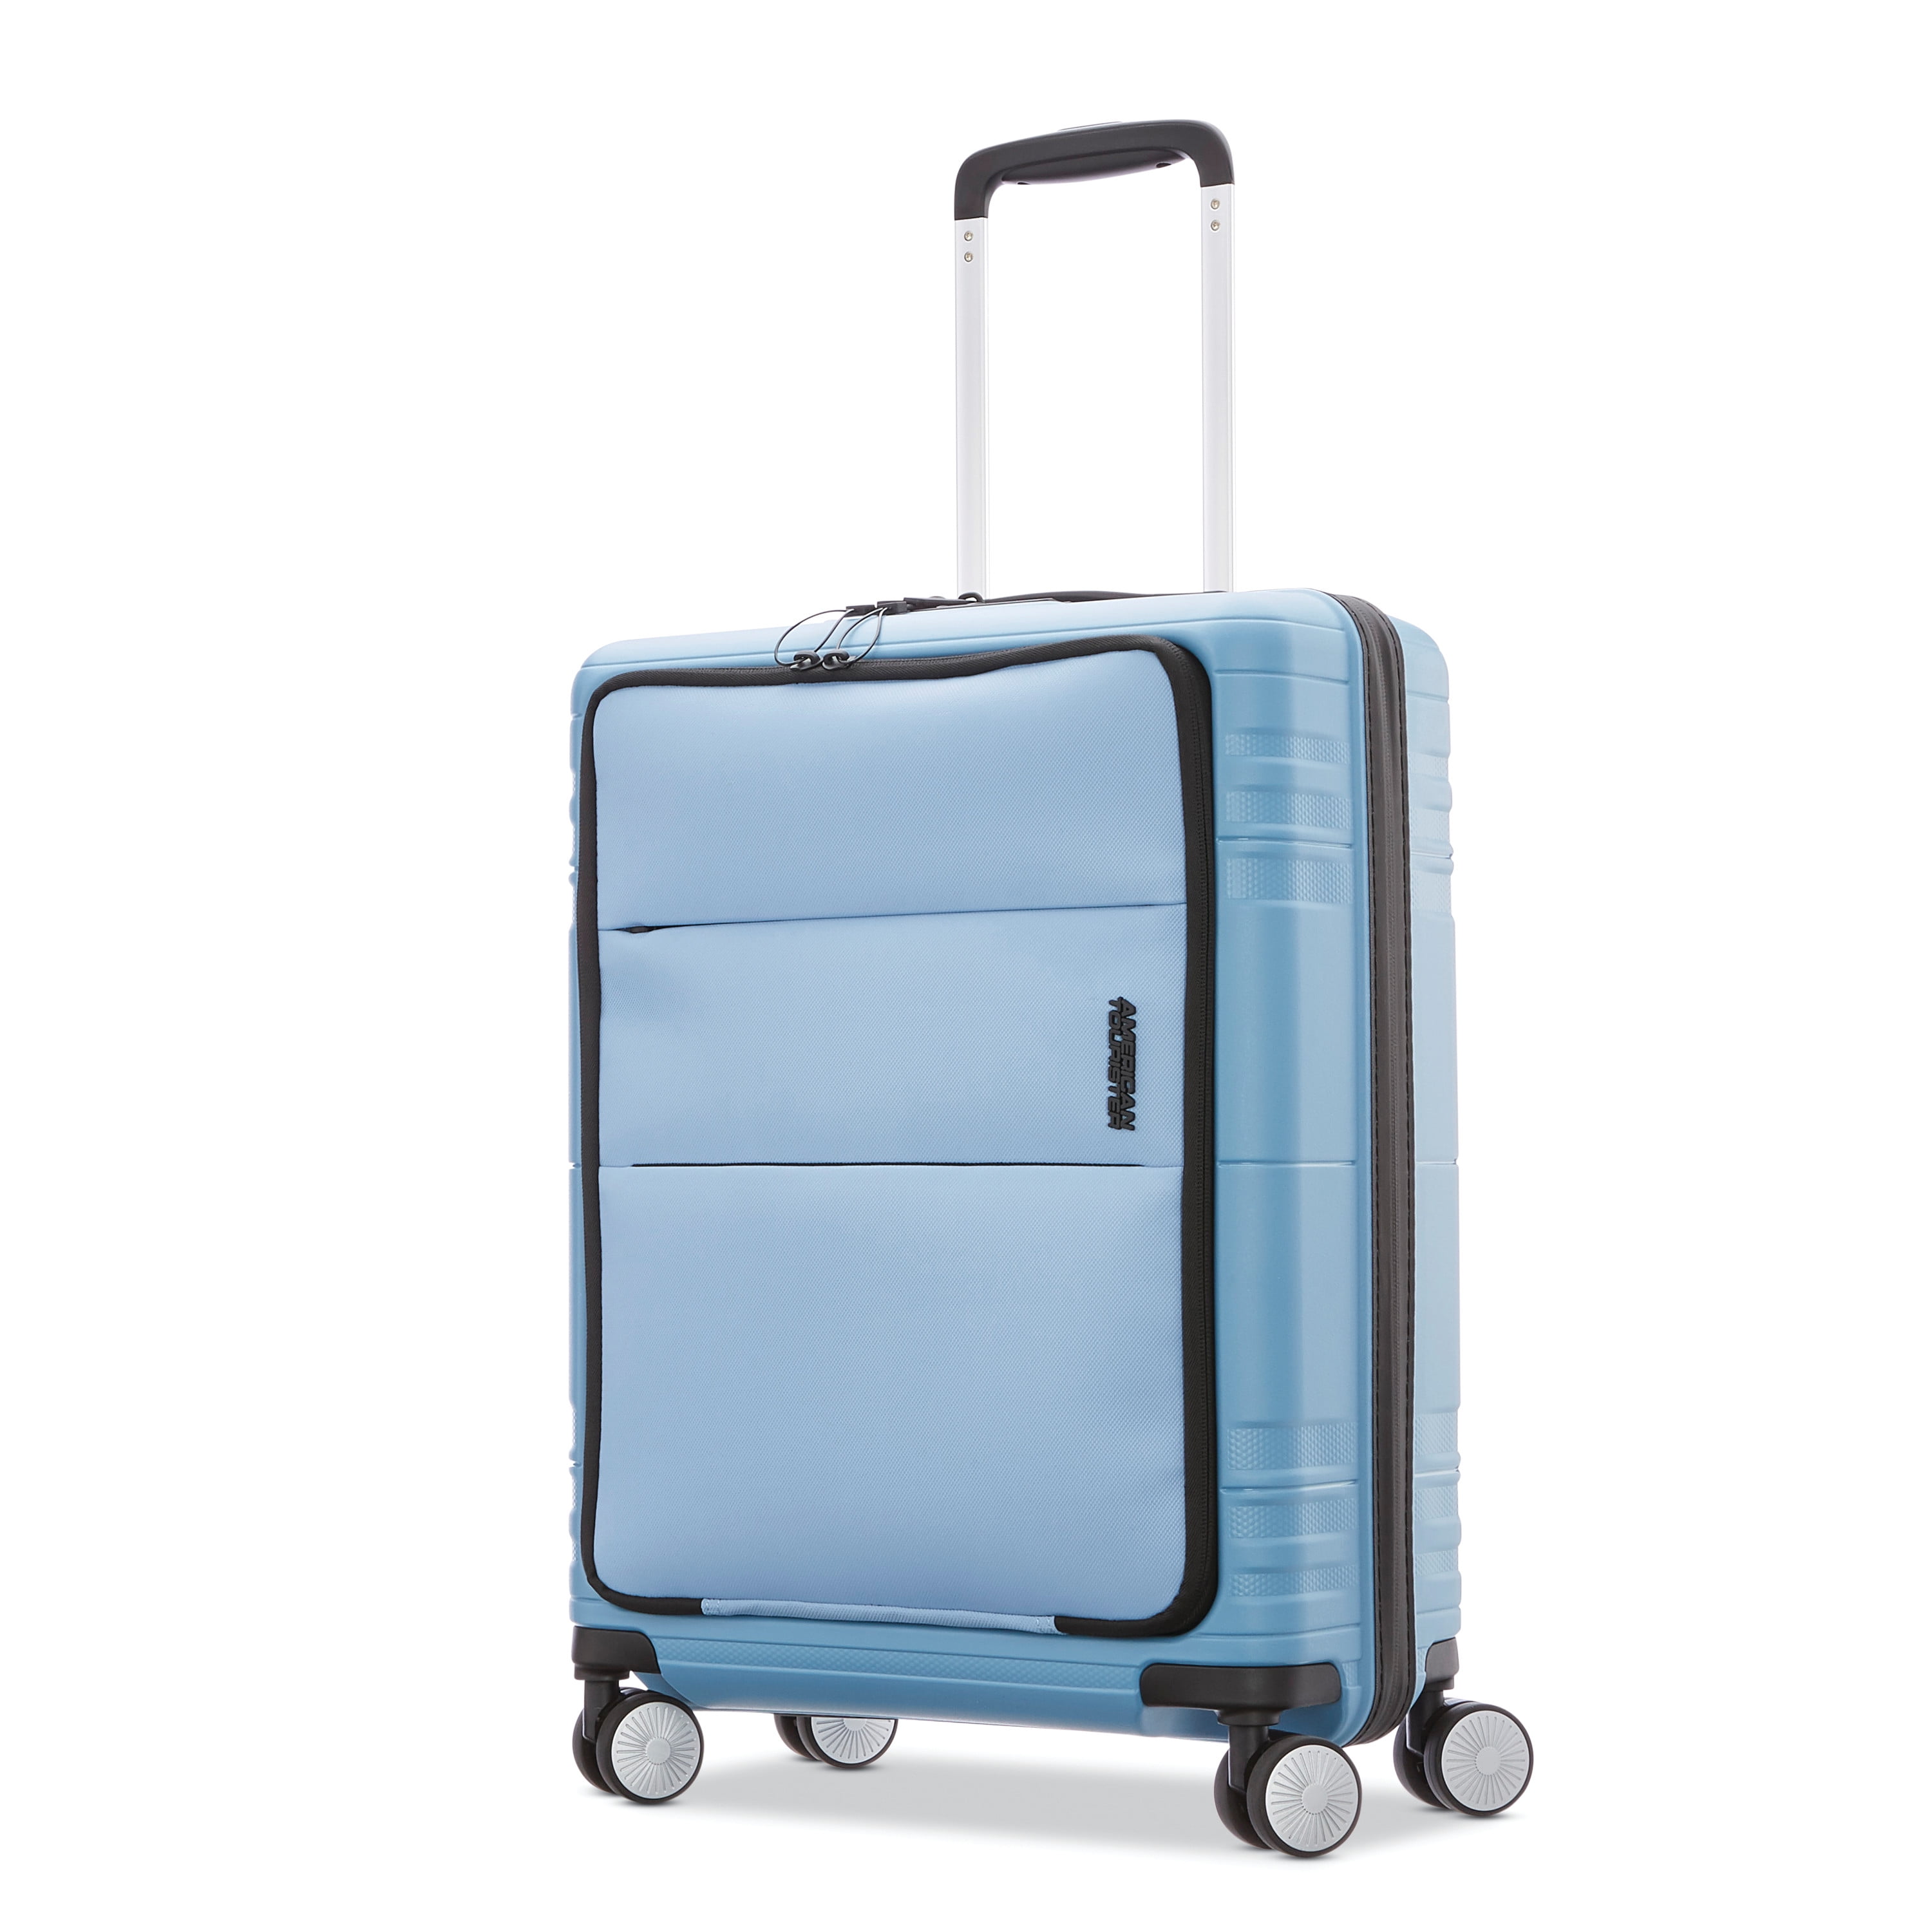 American 20-in Hybrid Hardside Compact Carry-on Spinner Luggage, Graphite Gray - Walmart.com